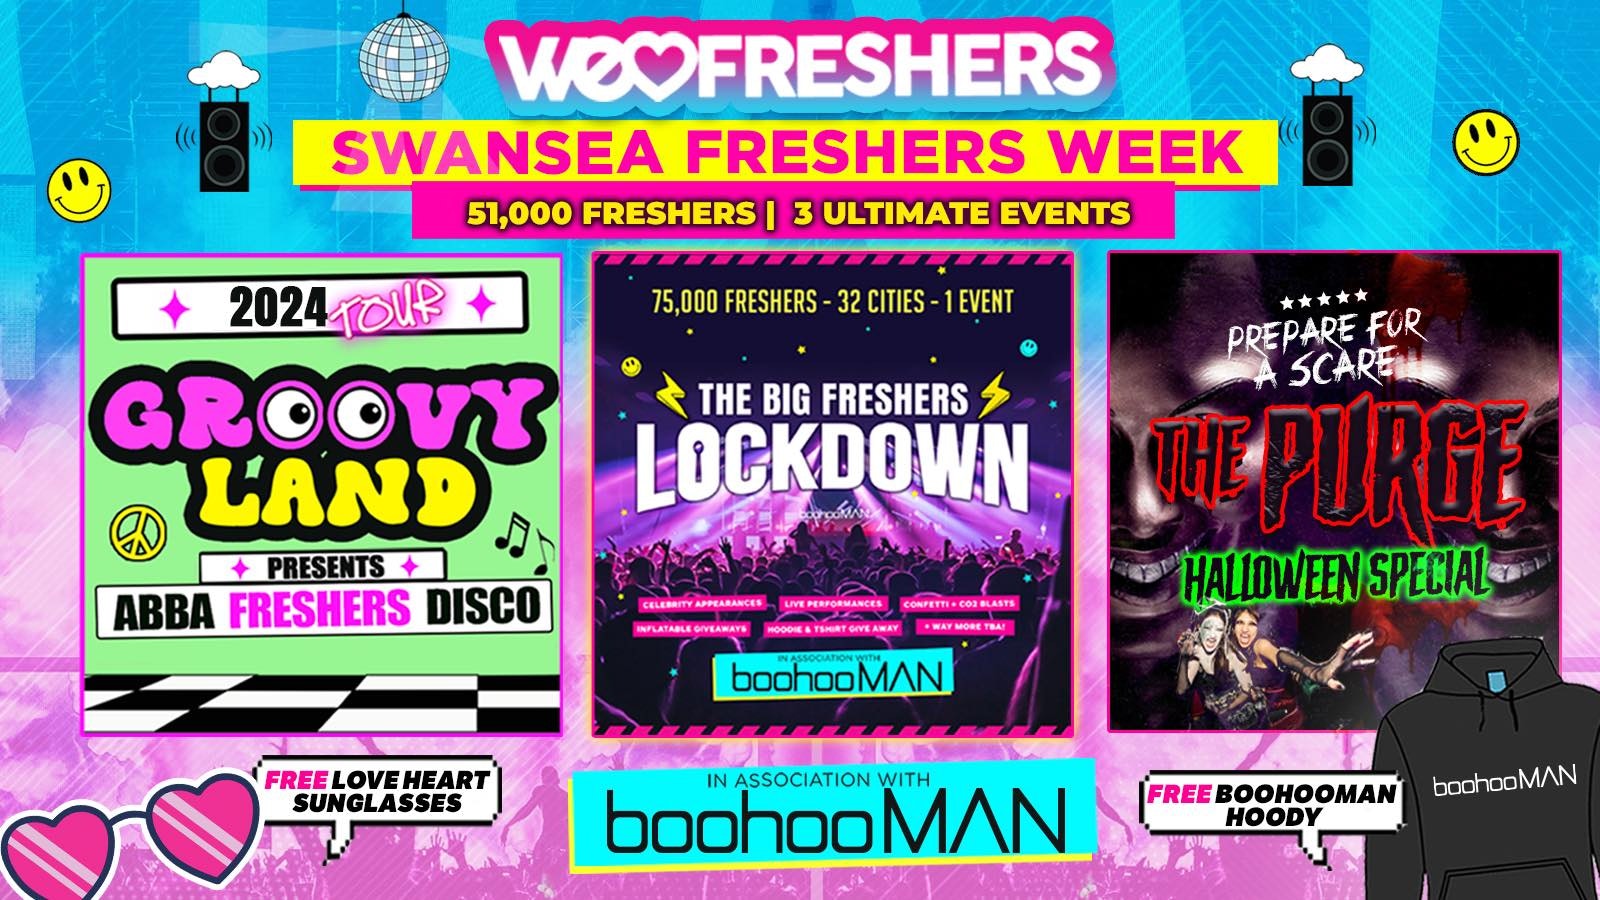 WE LOVE SWANSEA FRESHERS 2024 in association with boohooMAN ❗3 EVENTS ❗